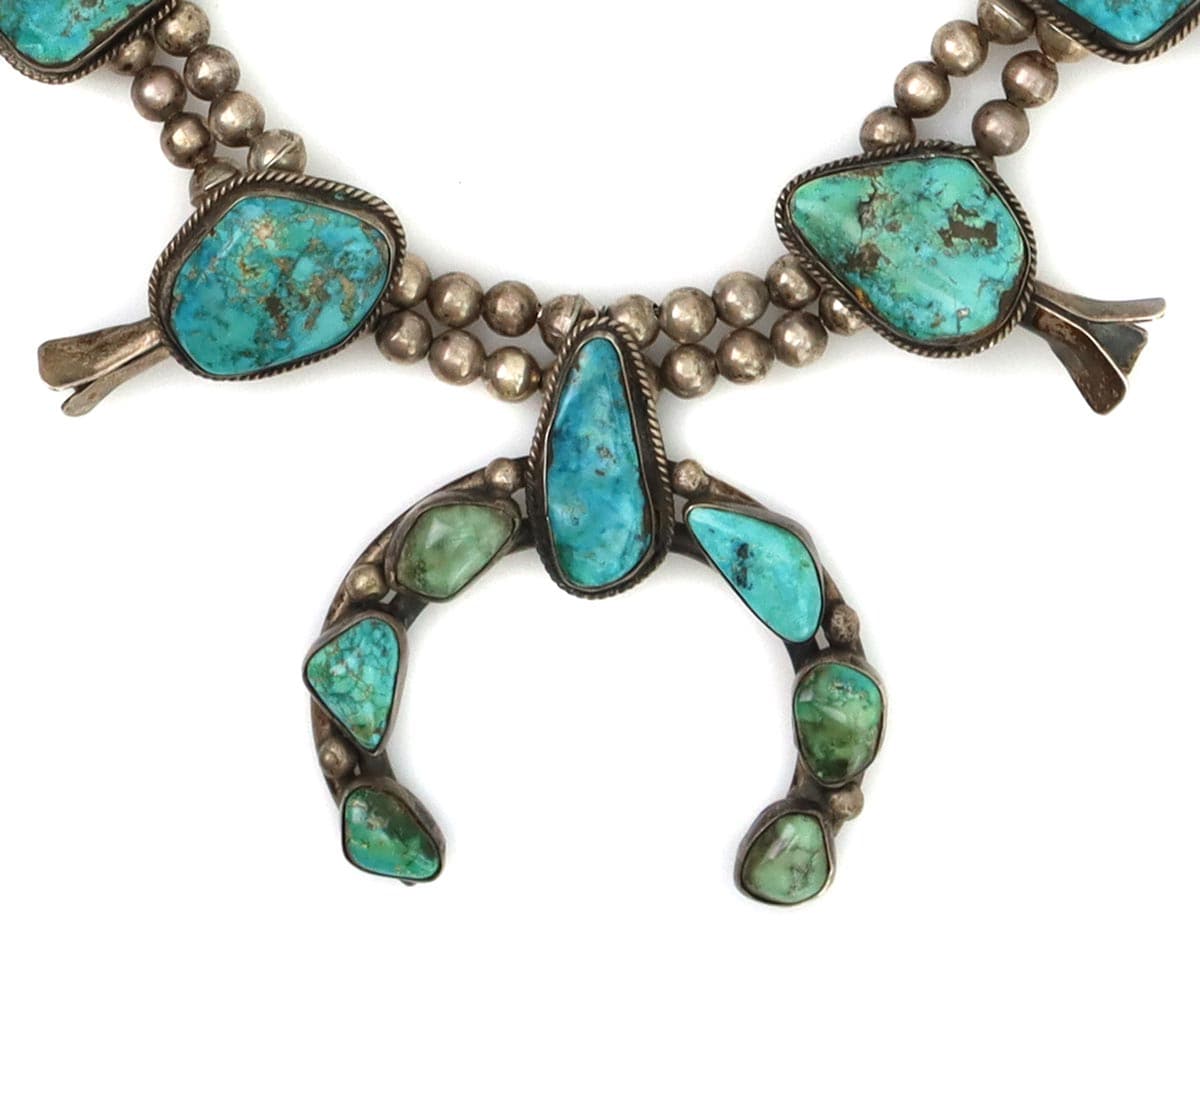 Navajo Turquoise and Silver Beaded Squash Blossom Necklace c. 1940-50s, 28" length (J15126)1
